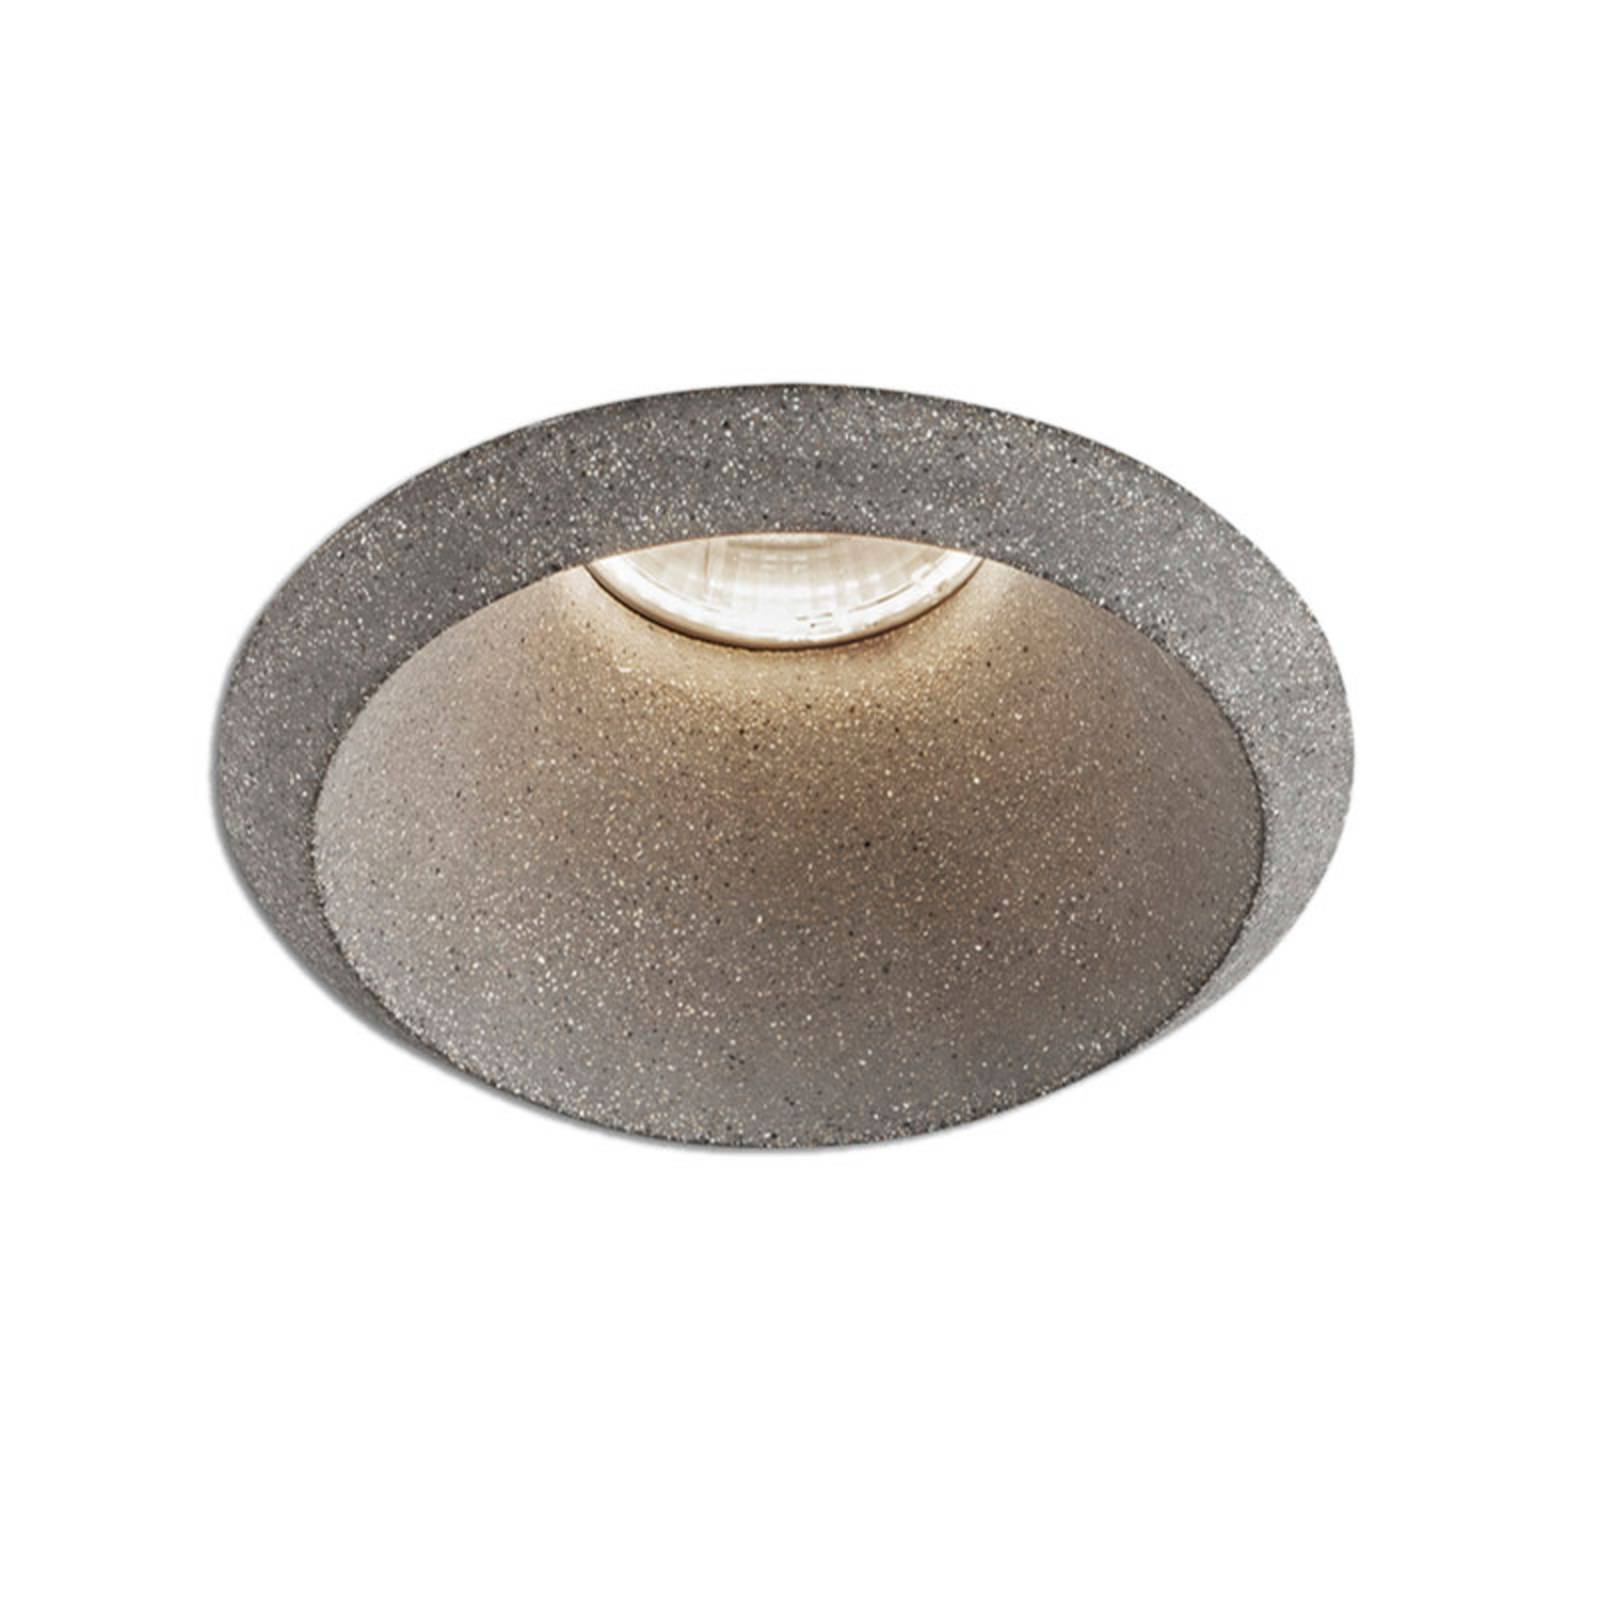 LEDS-C4 LEDS-C4 Play Raw downlight cement 927 17,7W 15°